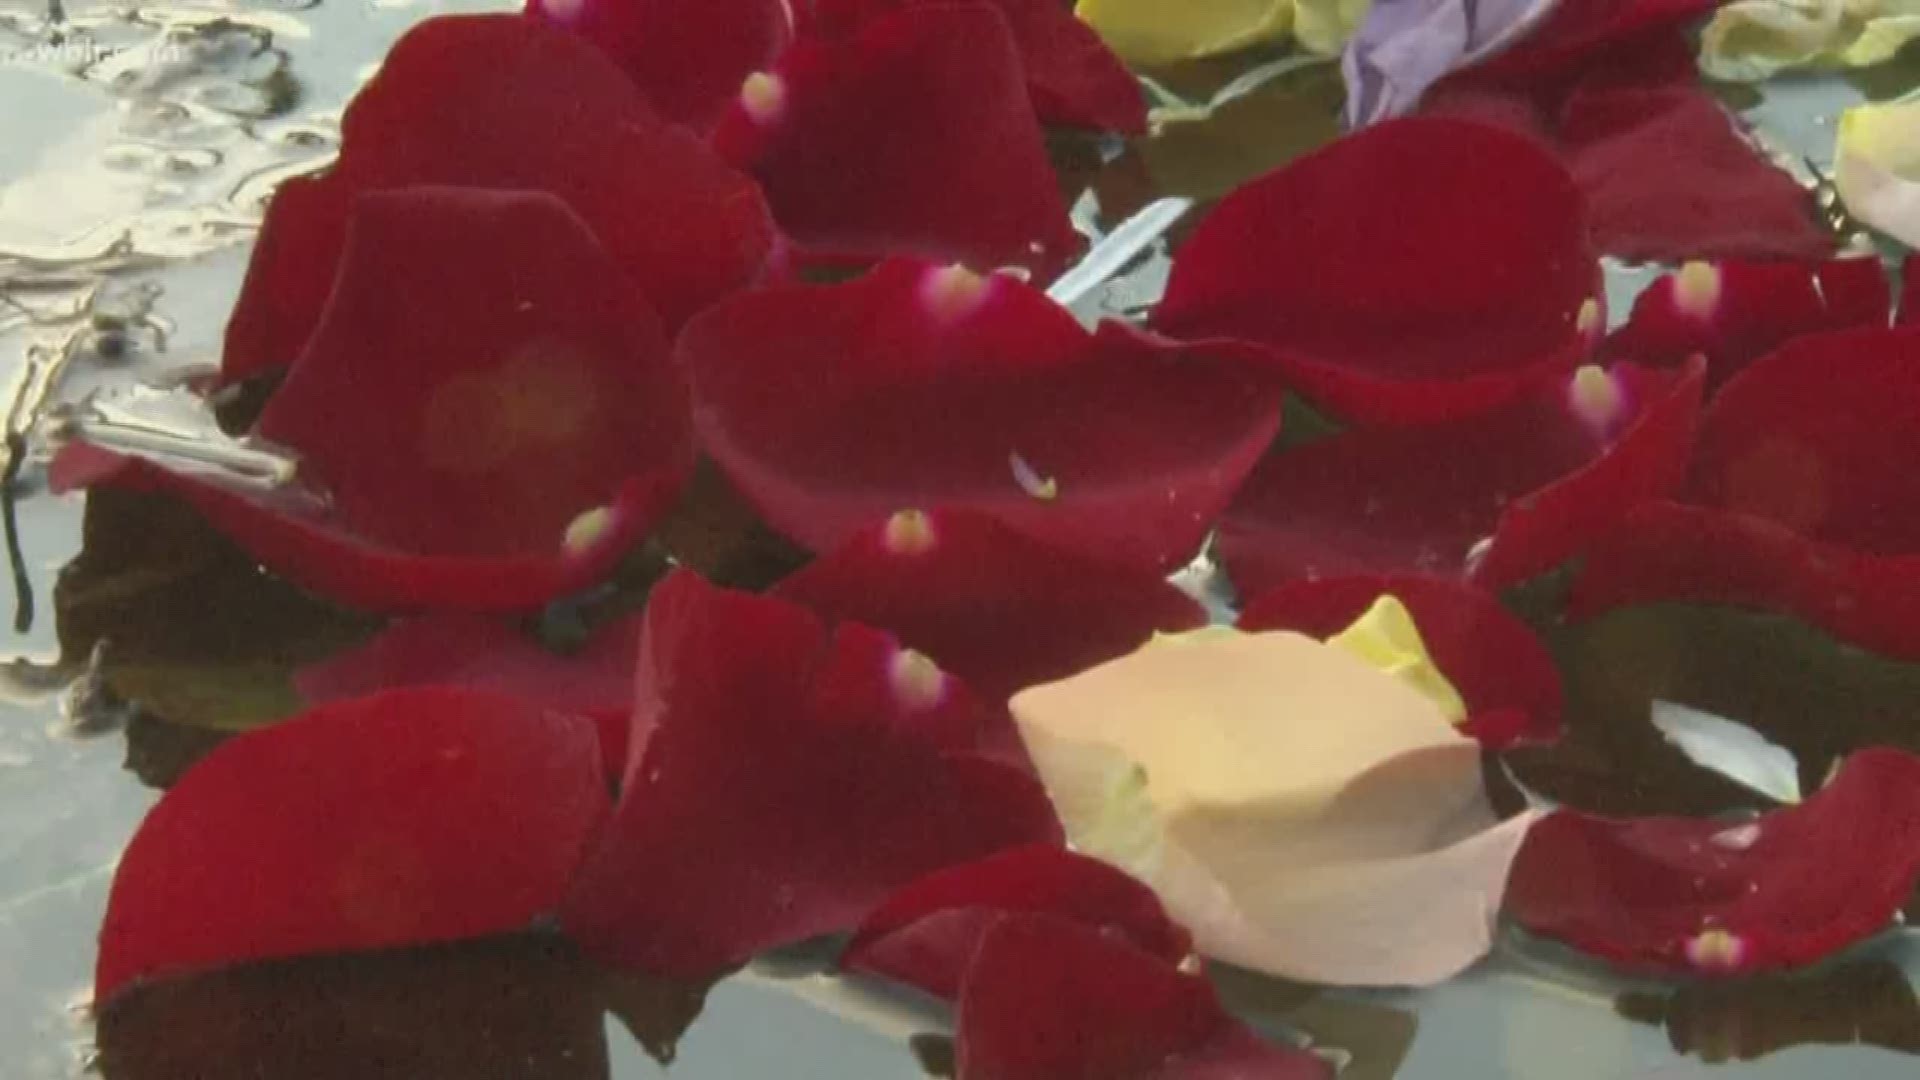 October is Domestic Violence Awareness Month. Knoxville's Helen Ross McNabb Center had its first Flowers on the Water event to start the conversation.